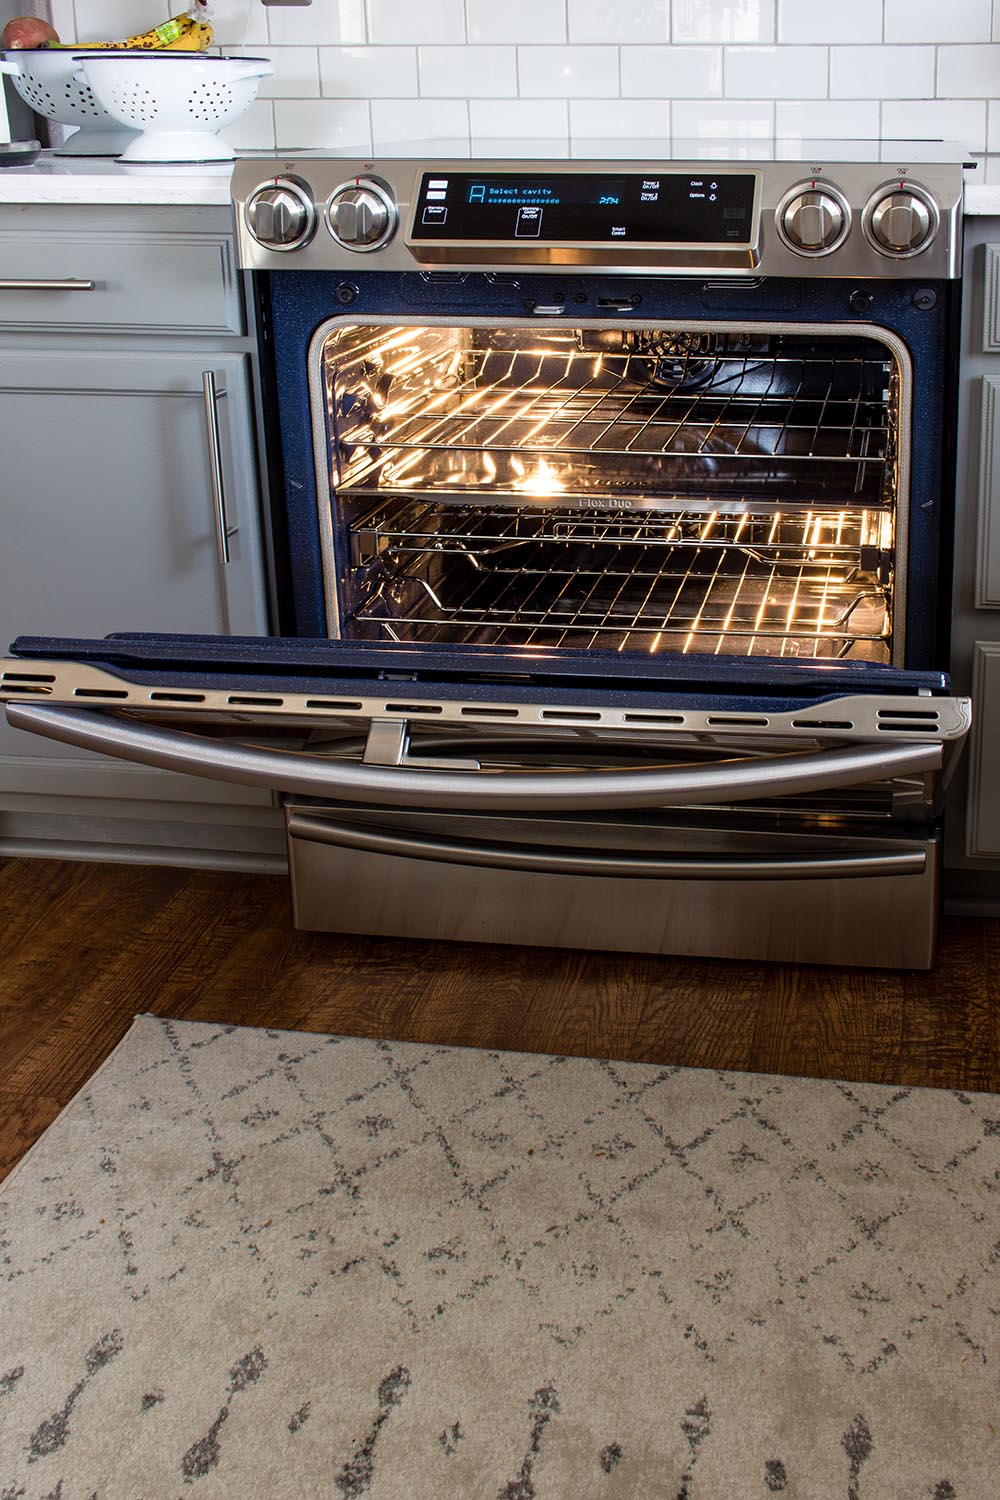 Three cooking racks are exposed through the open door of a Samsung double oven.